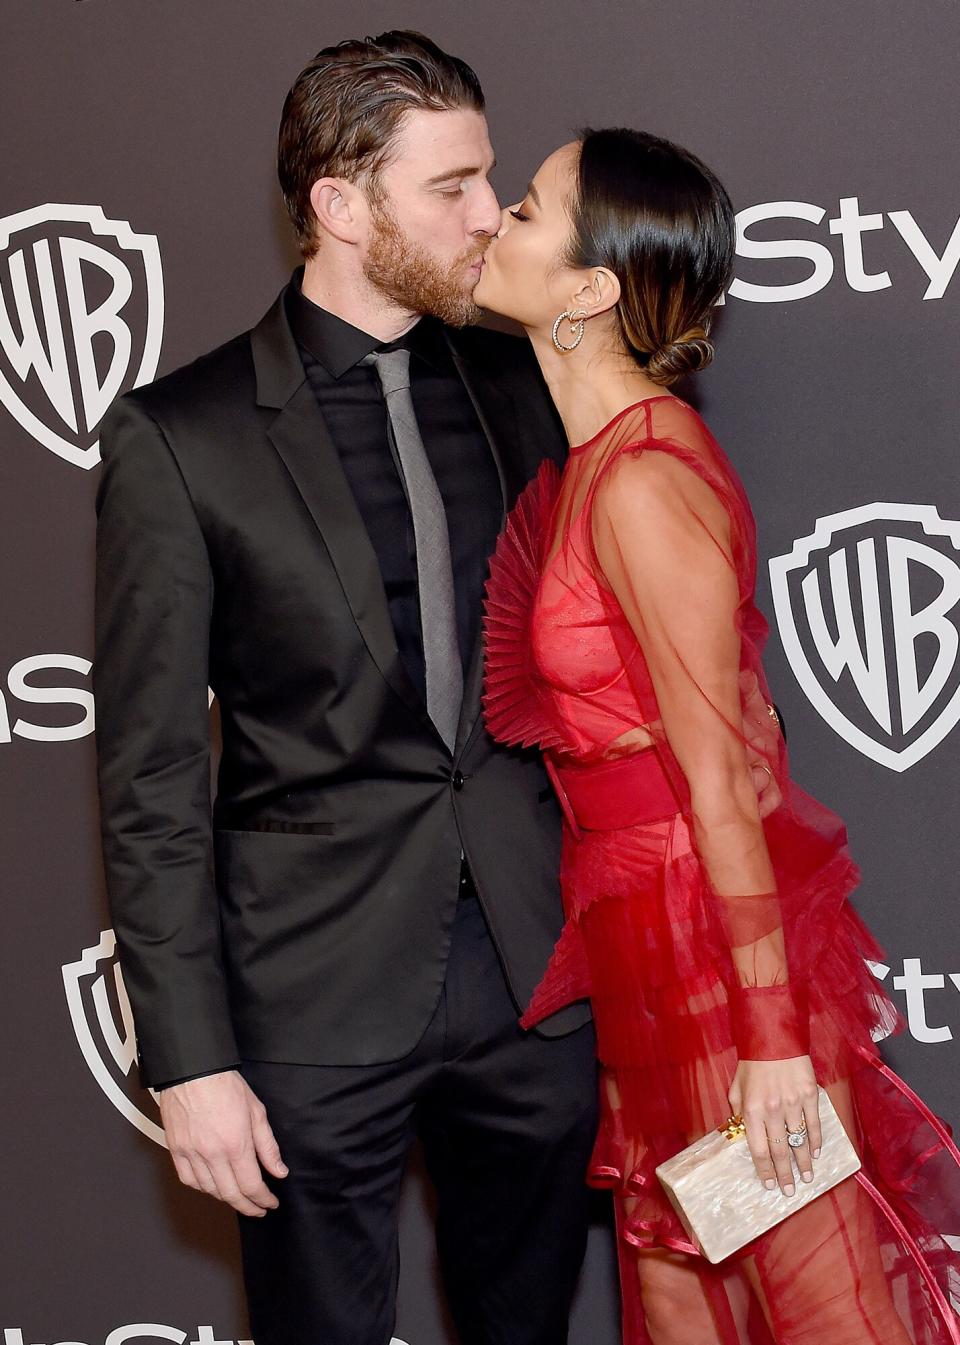 Jamie Chung and Bryan Greenberg attends the InStyle And Warner Bros. Golden Globes After Party 2019 at The Beverly Hilton Hotel on January 6, 2019 in Beverly Hills, California